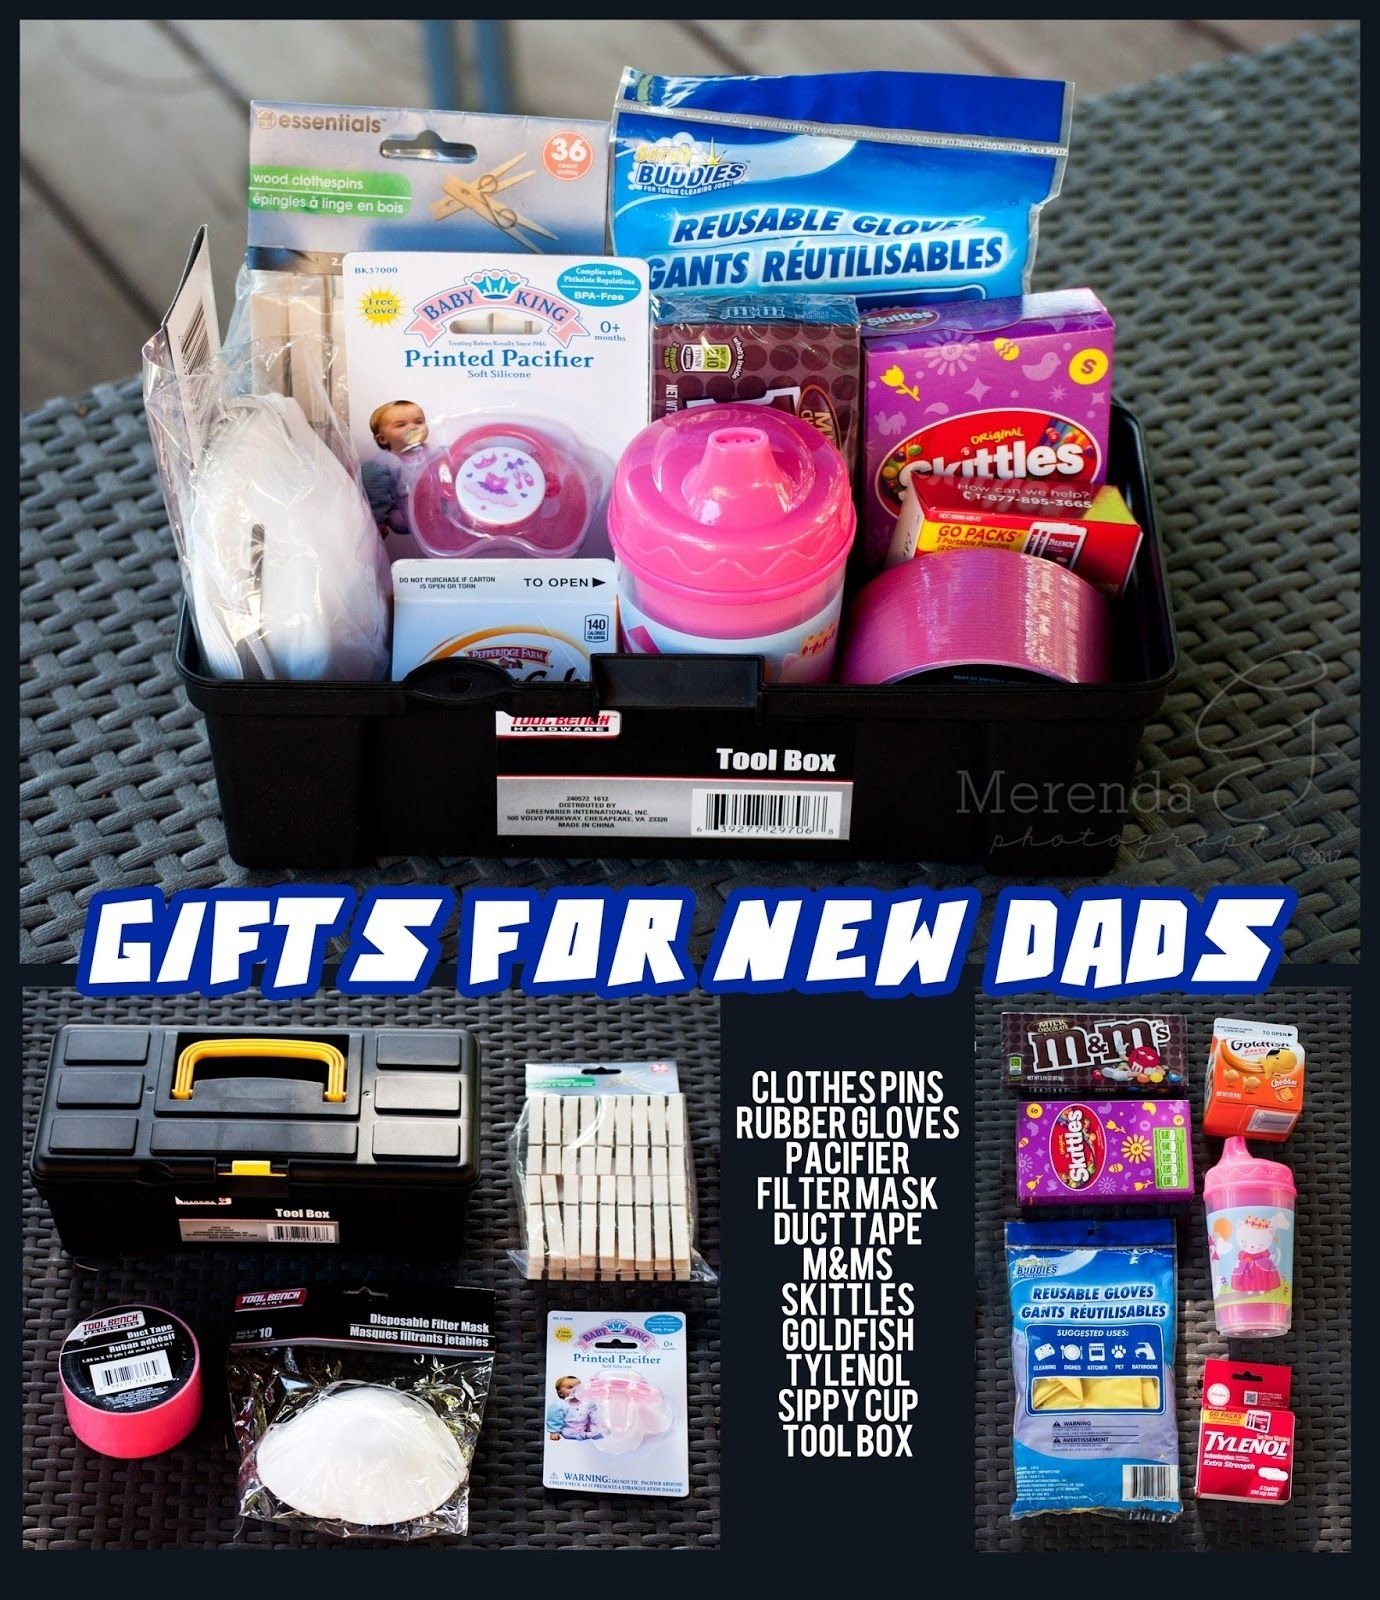 10 Elegant Gift Ideas For First Time Dads growing with the gordons gift ideas for new dads daddy survival kit 2022